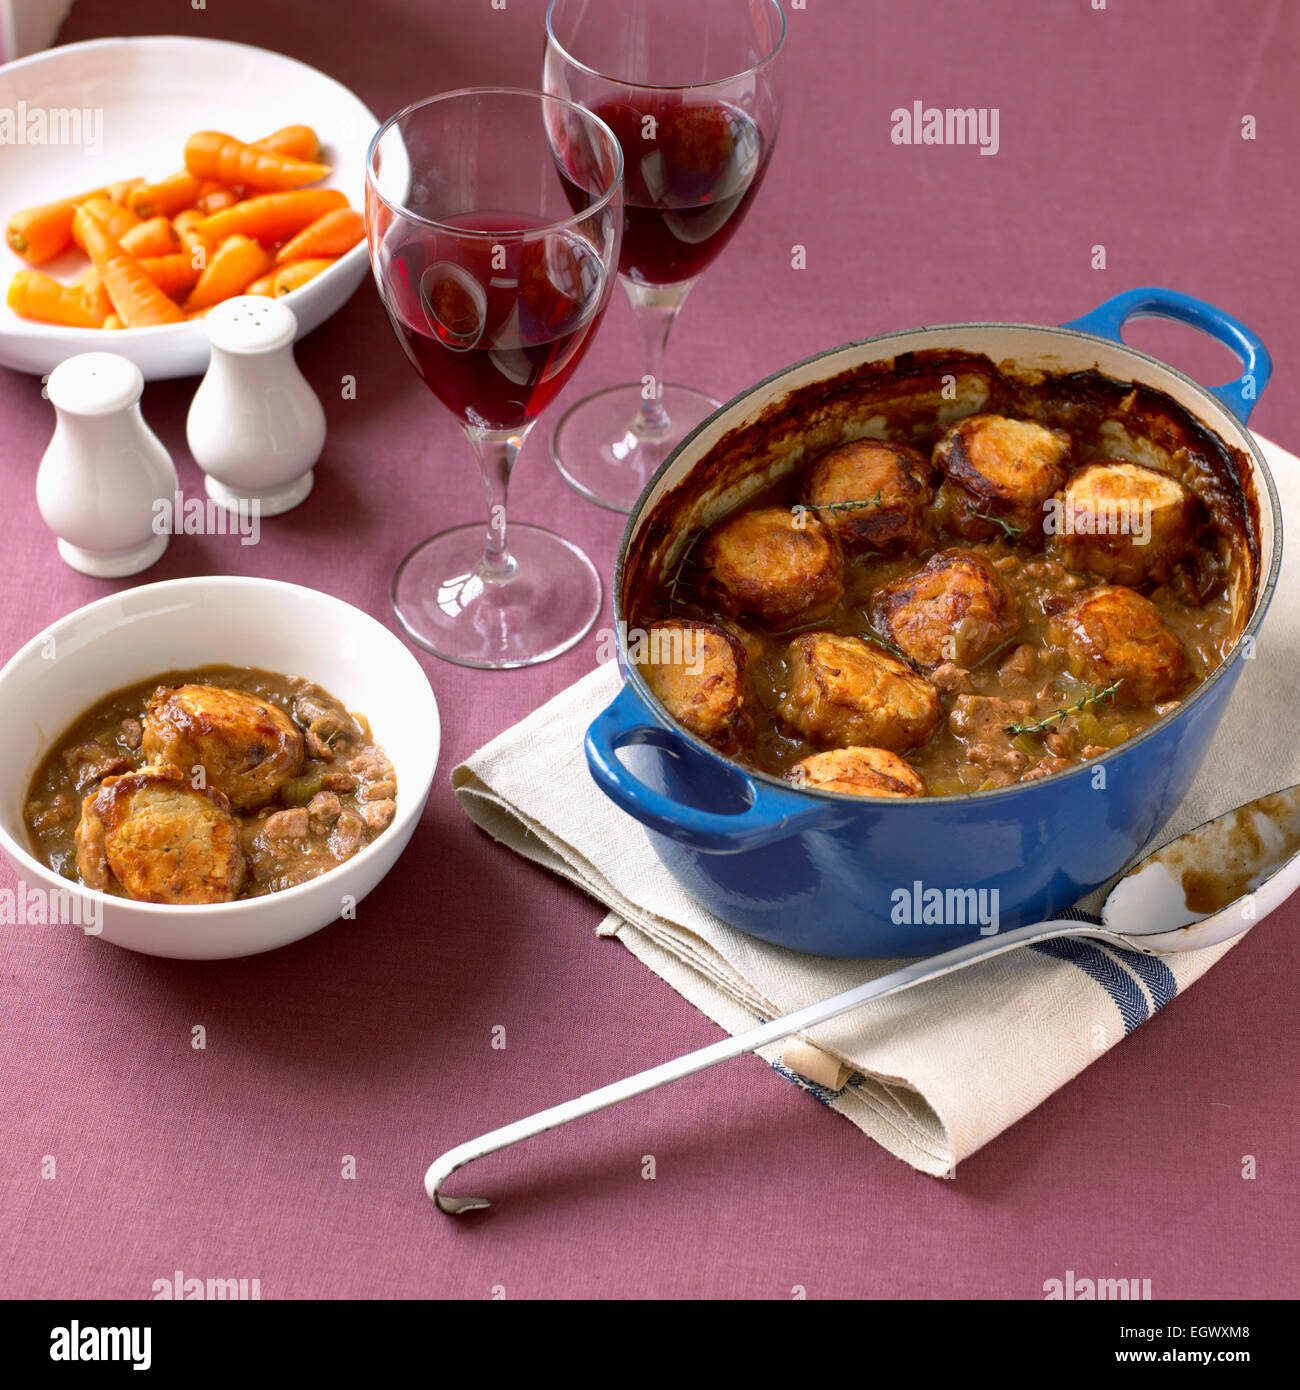 Game casserole with thyme and mustard dumplings Stock Photo